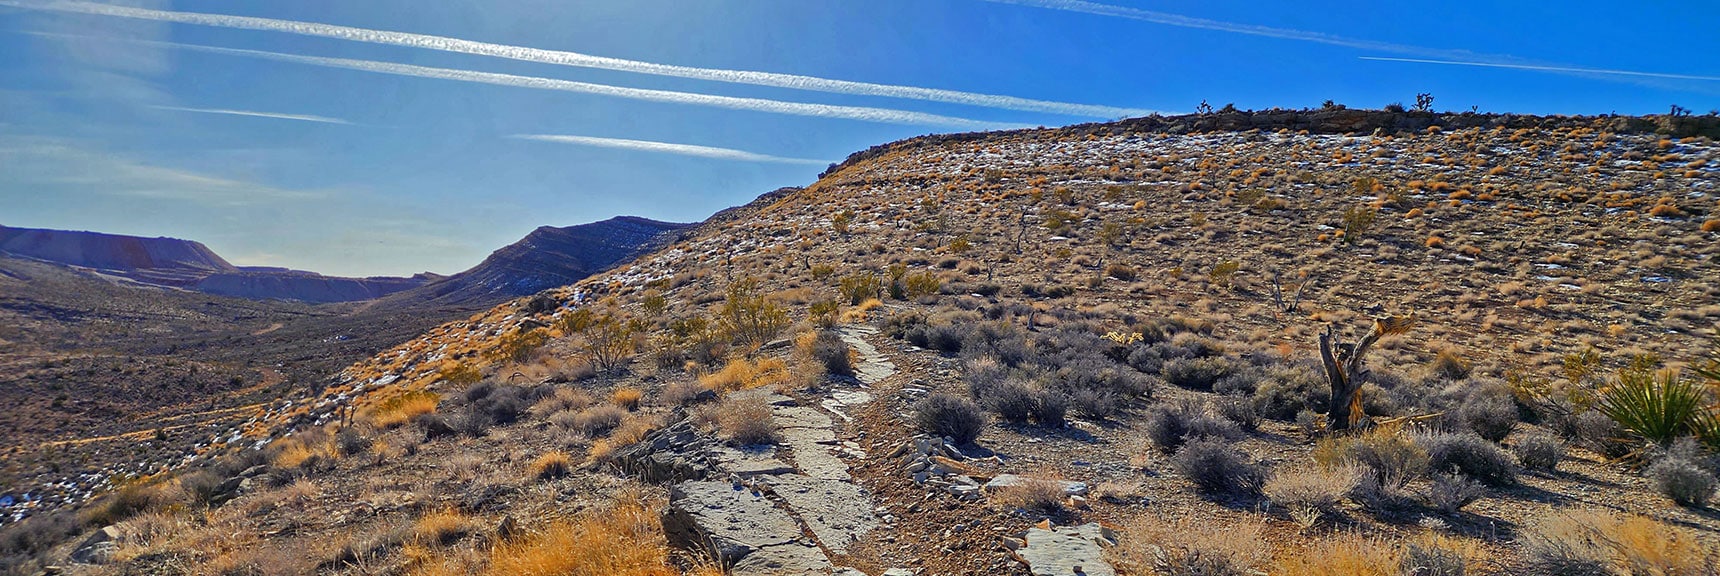 Found a Nice Trail on the High Ridgeline West of Blue Diamond Hill. | Western Outer Circuit | Blue Diamond Hill | Red Rock Canyon, Nevada